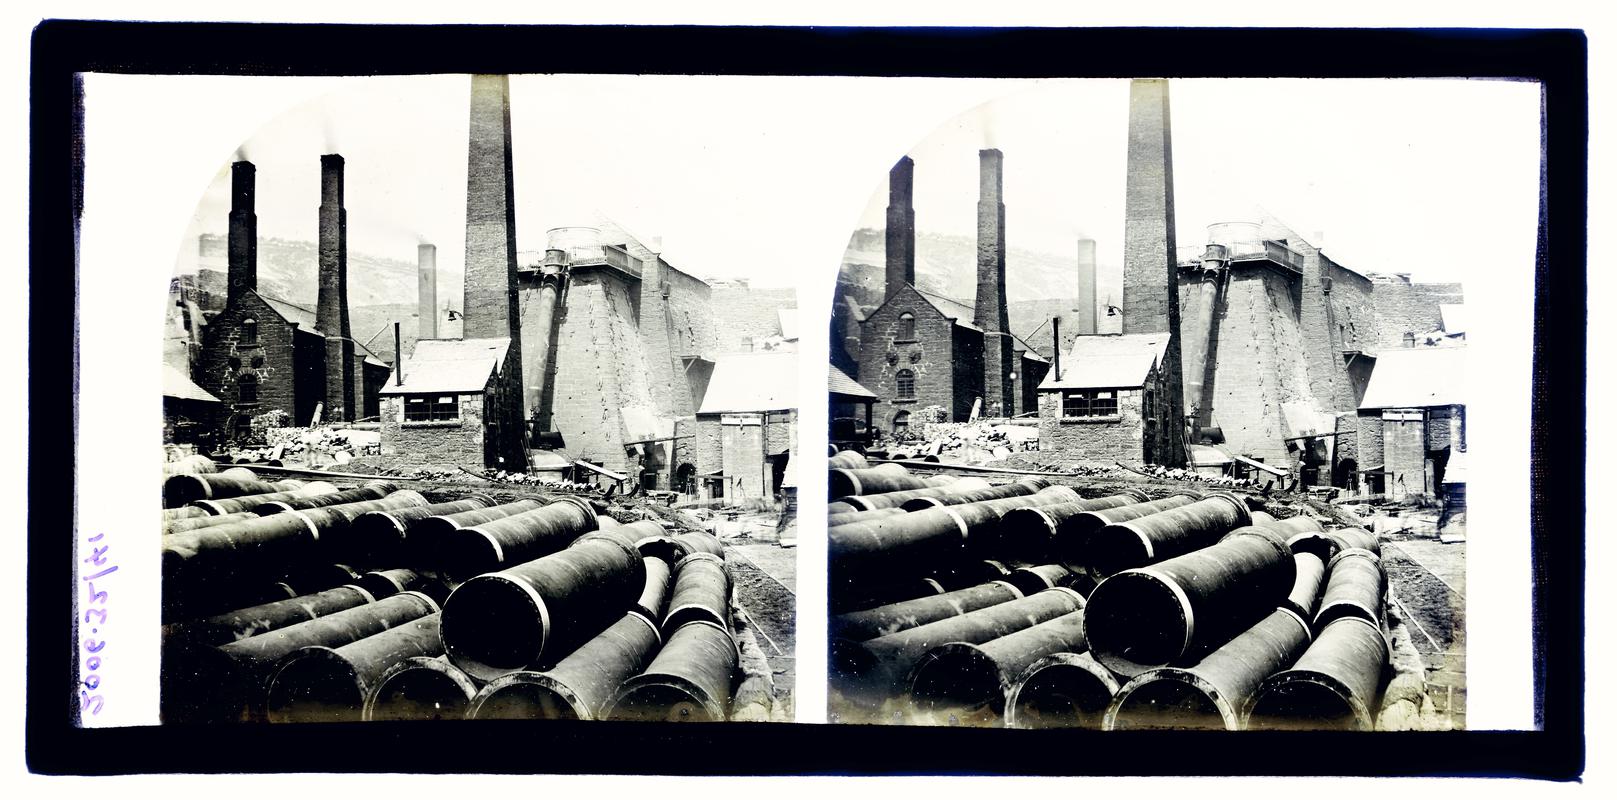 Glass stereoscopic slide showing stacks of pipes with a blast furnace in the background, Brymbo.